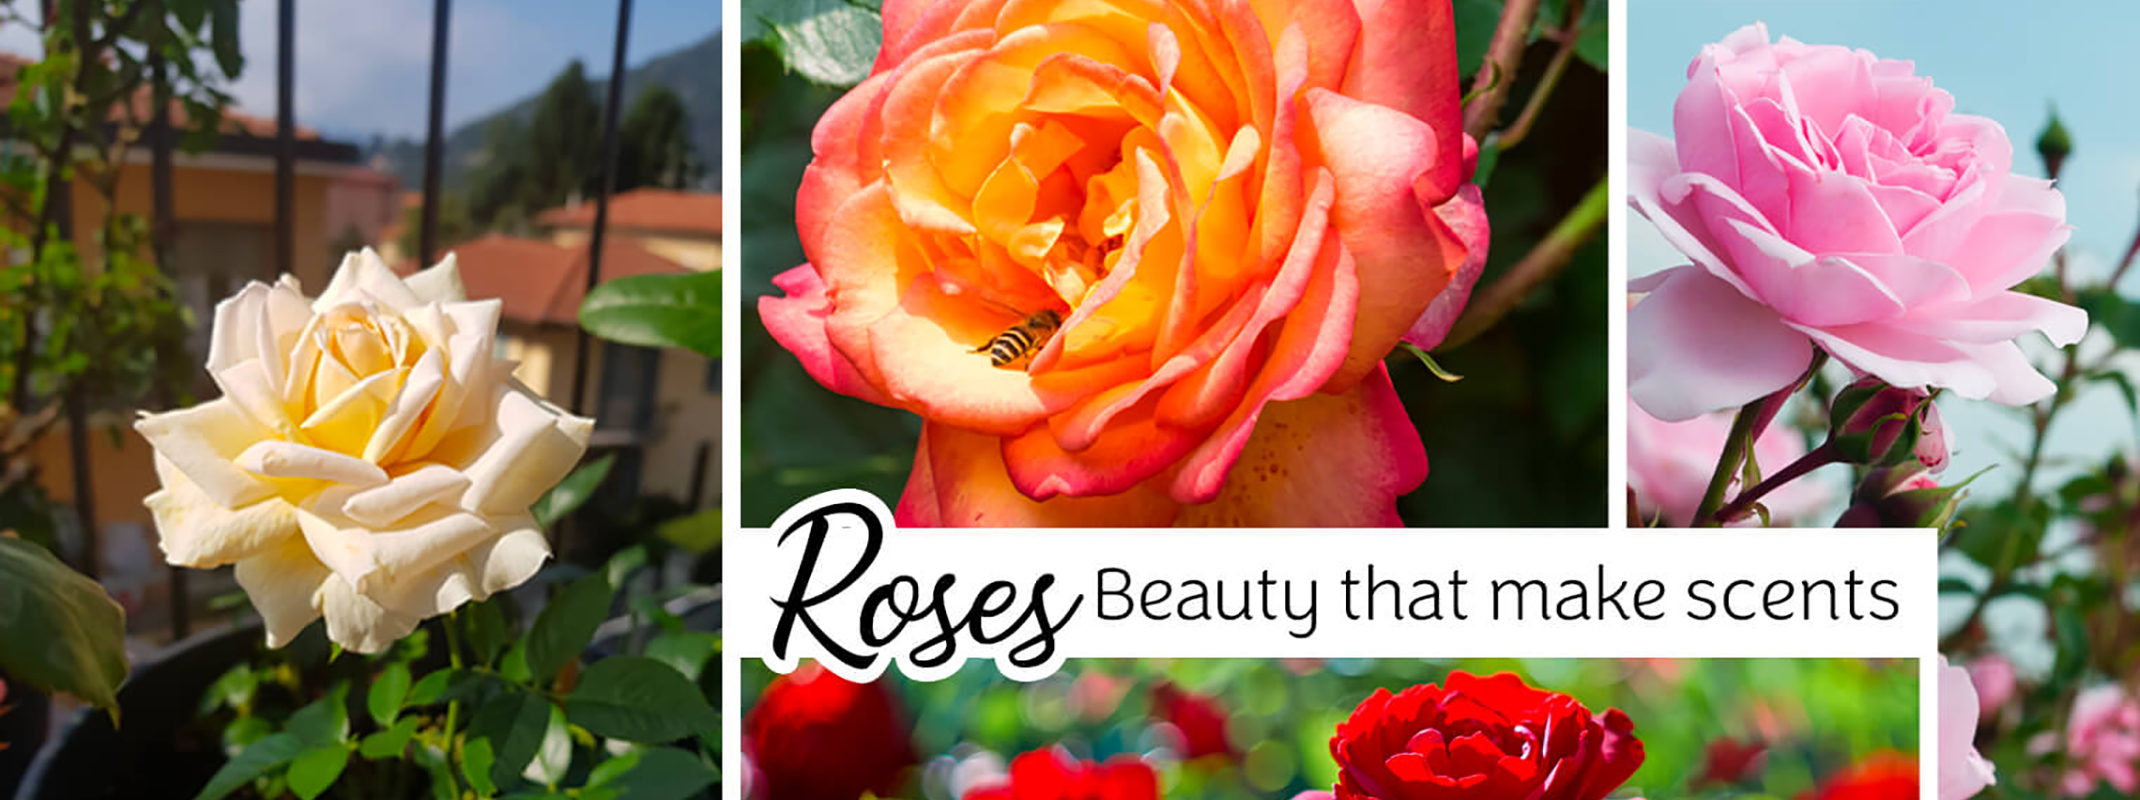 Assorted pictures of roses with the words roses, beauty that makes scents on the image